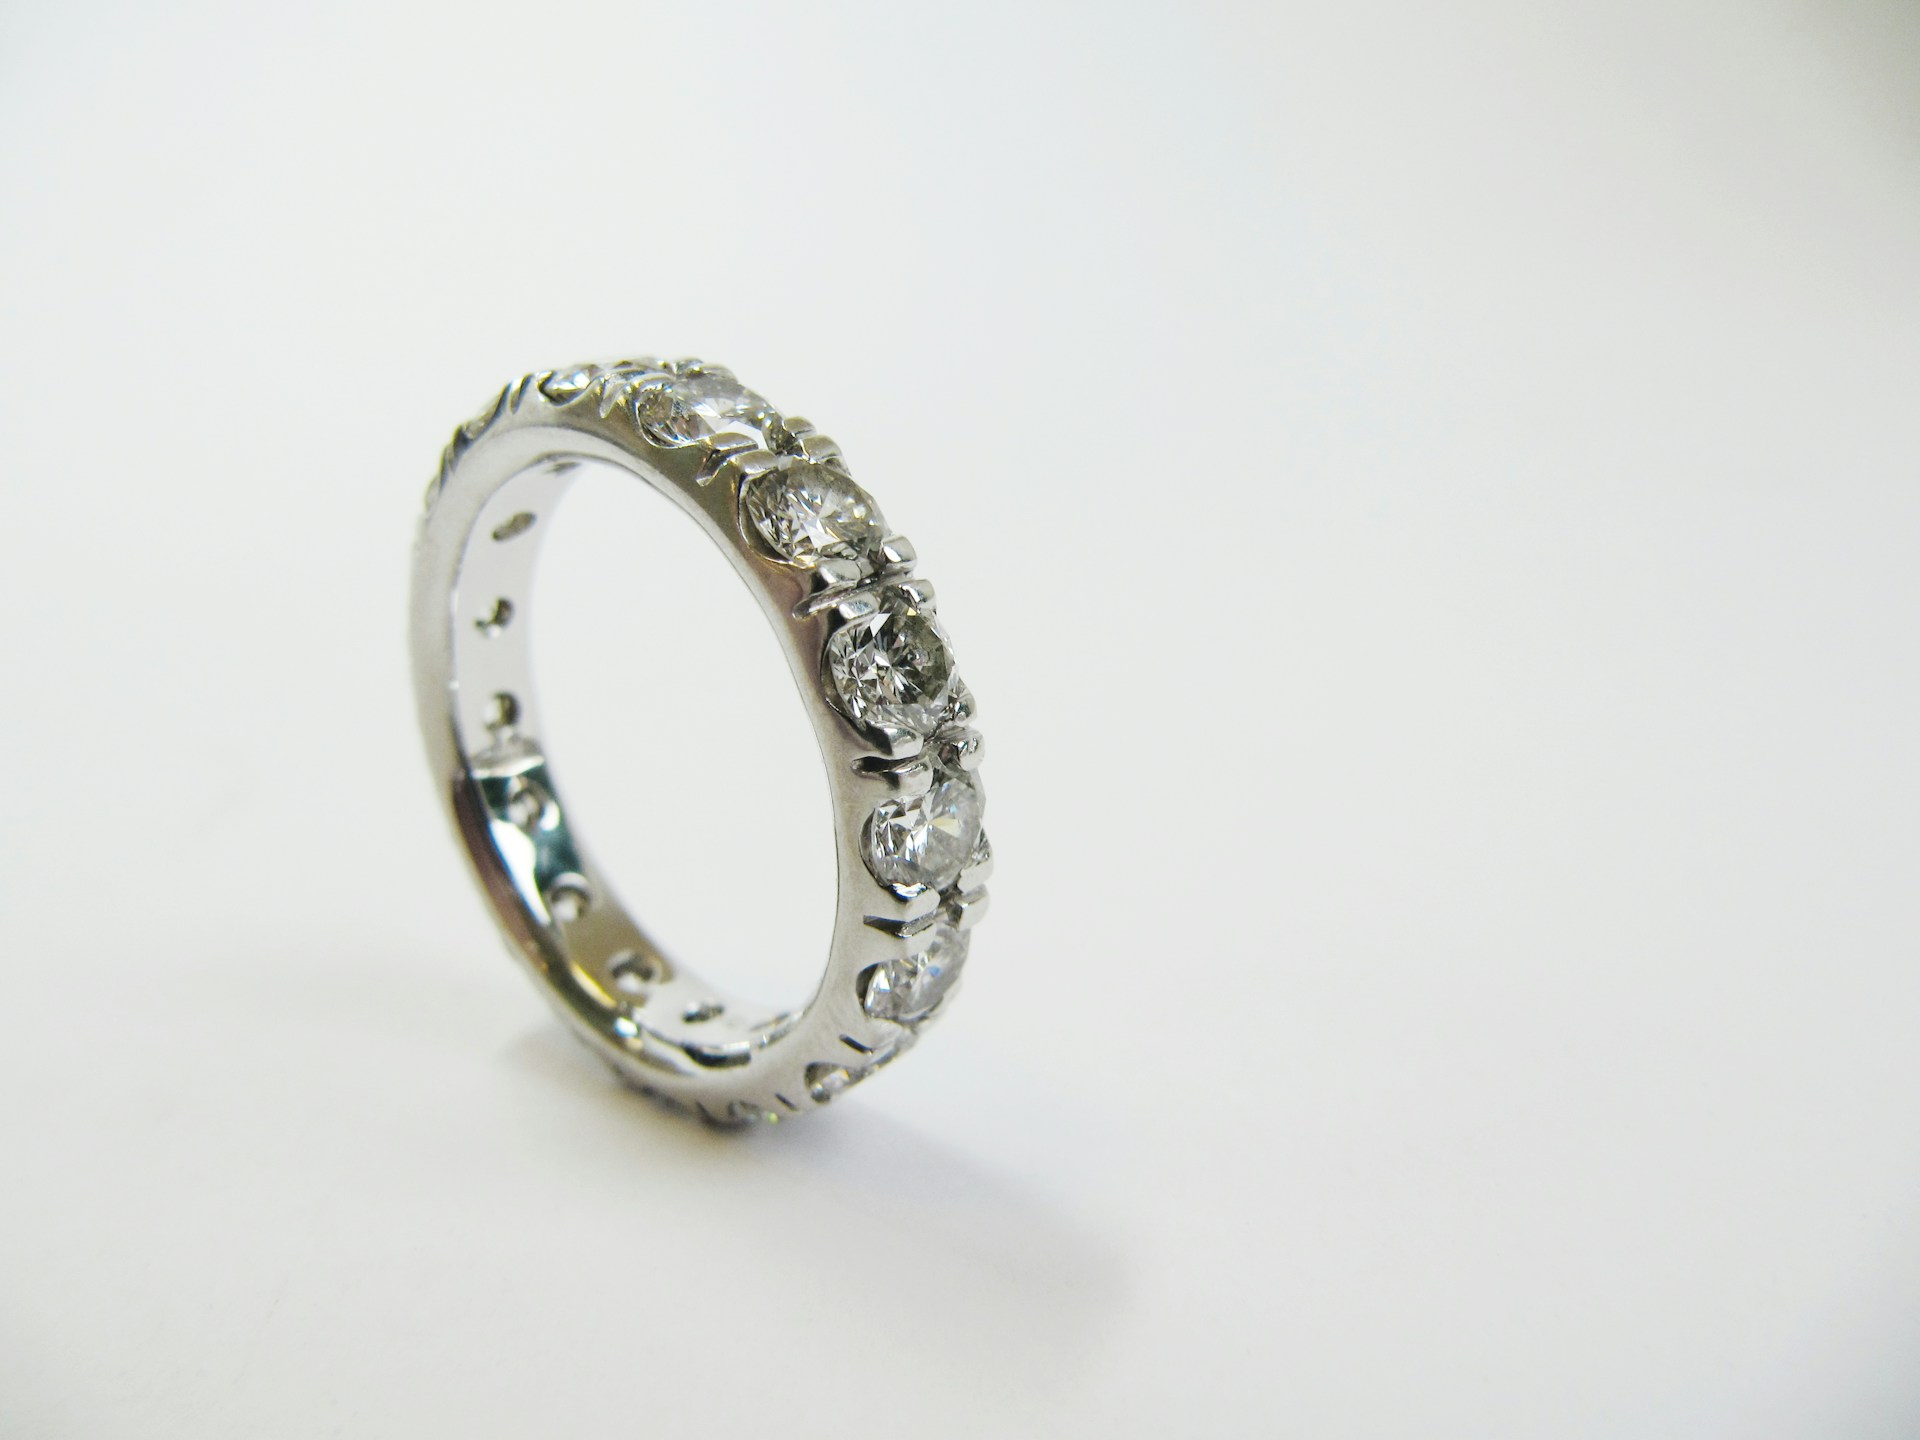 A white gold diamond eternity wedding band standing on its side on a white surface